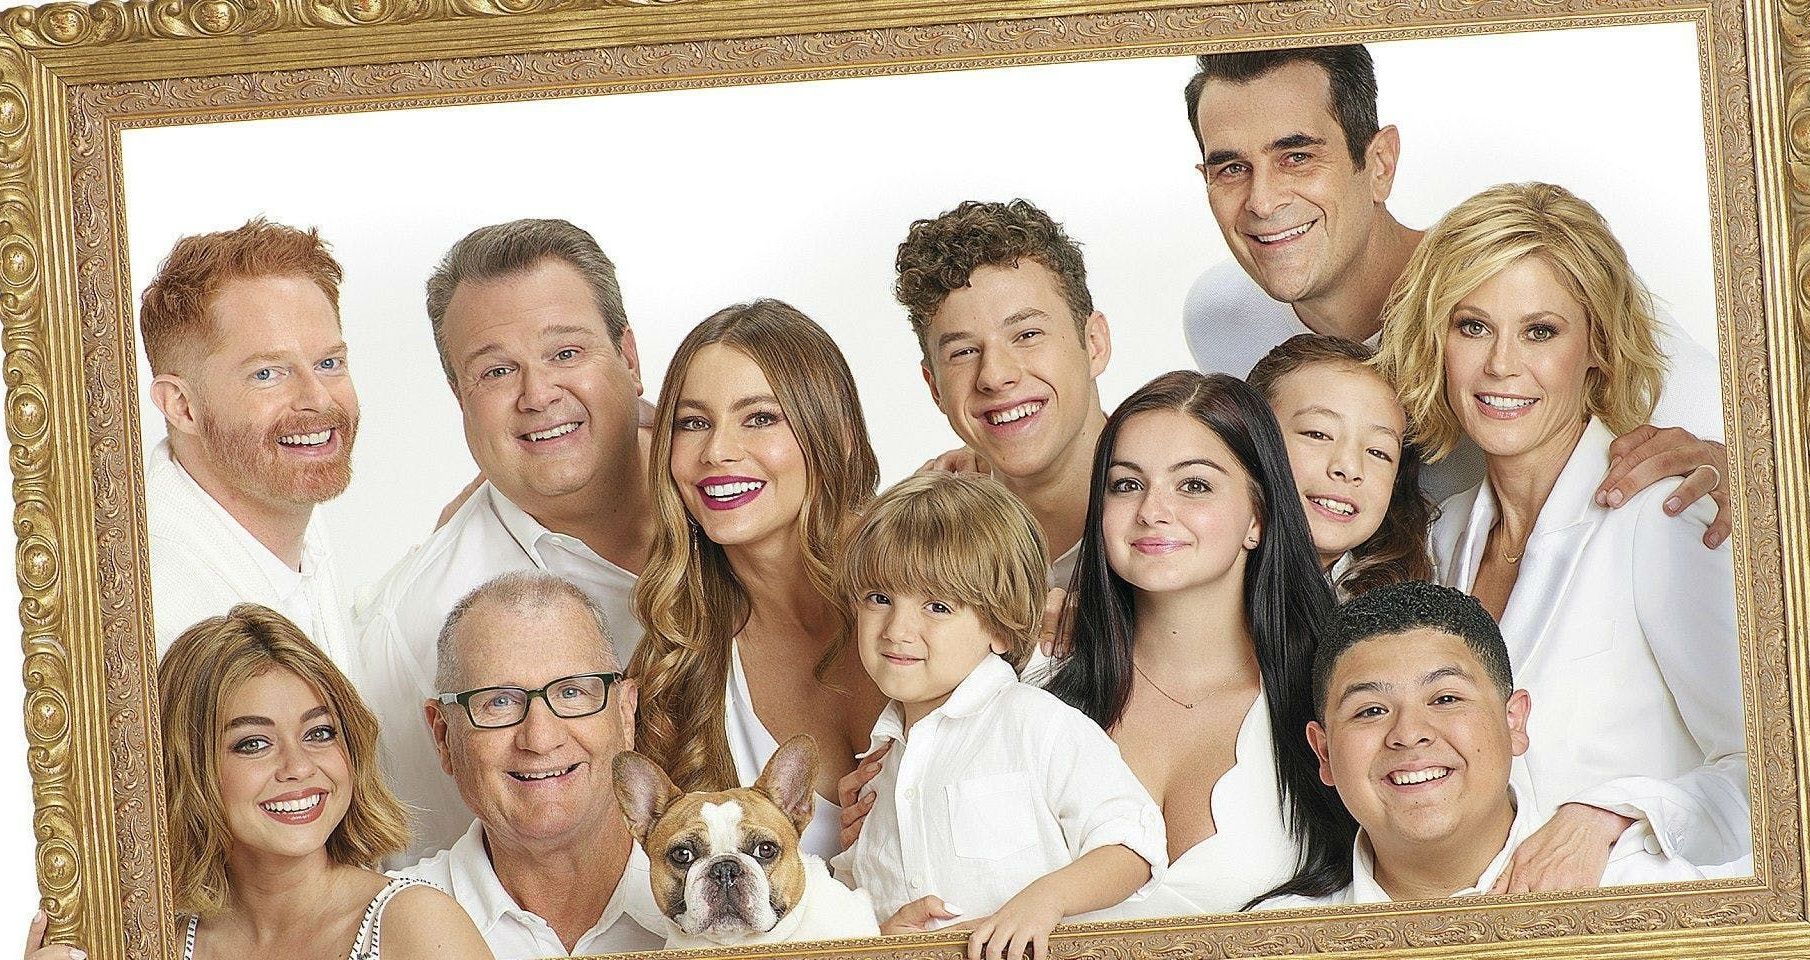 Modern family characters